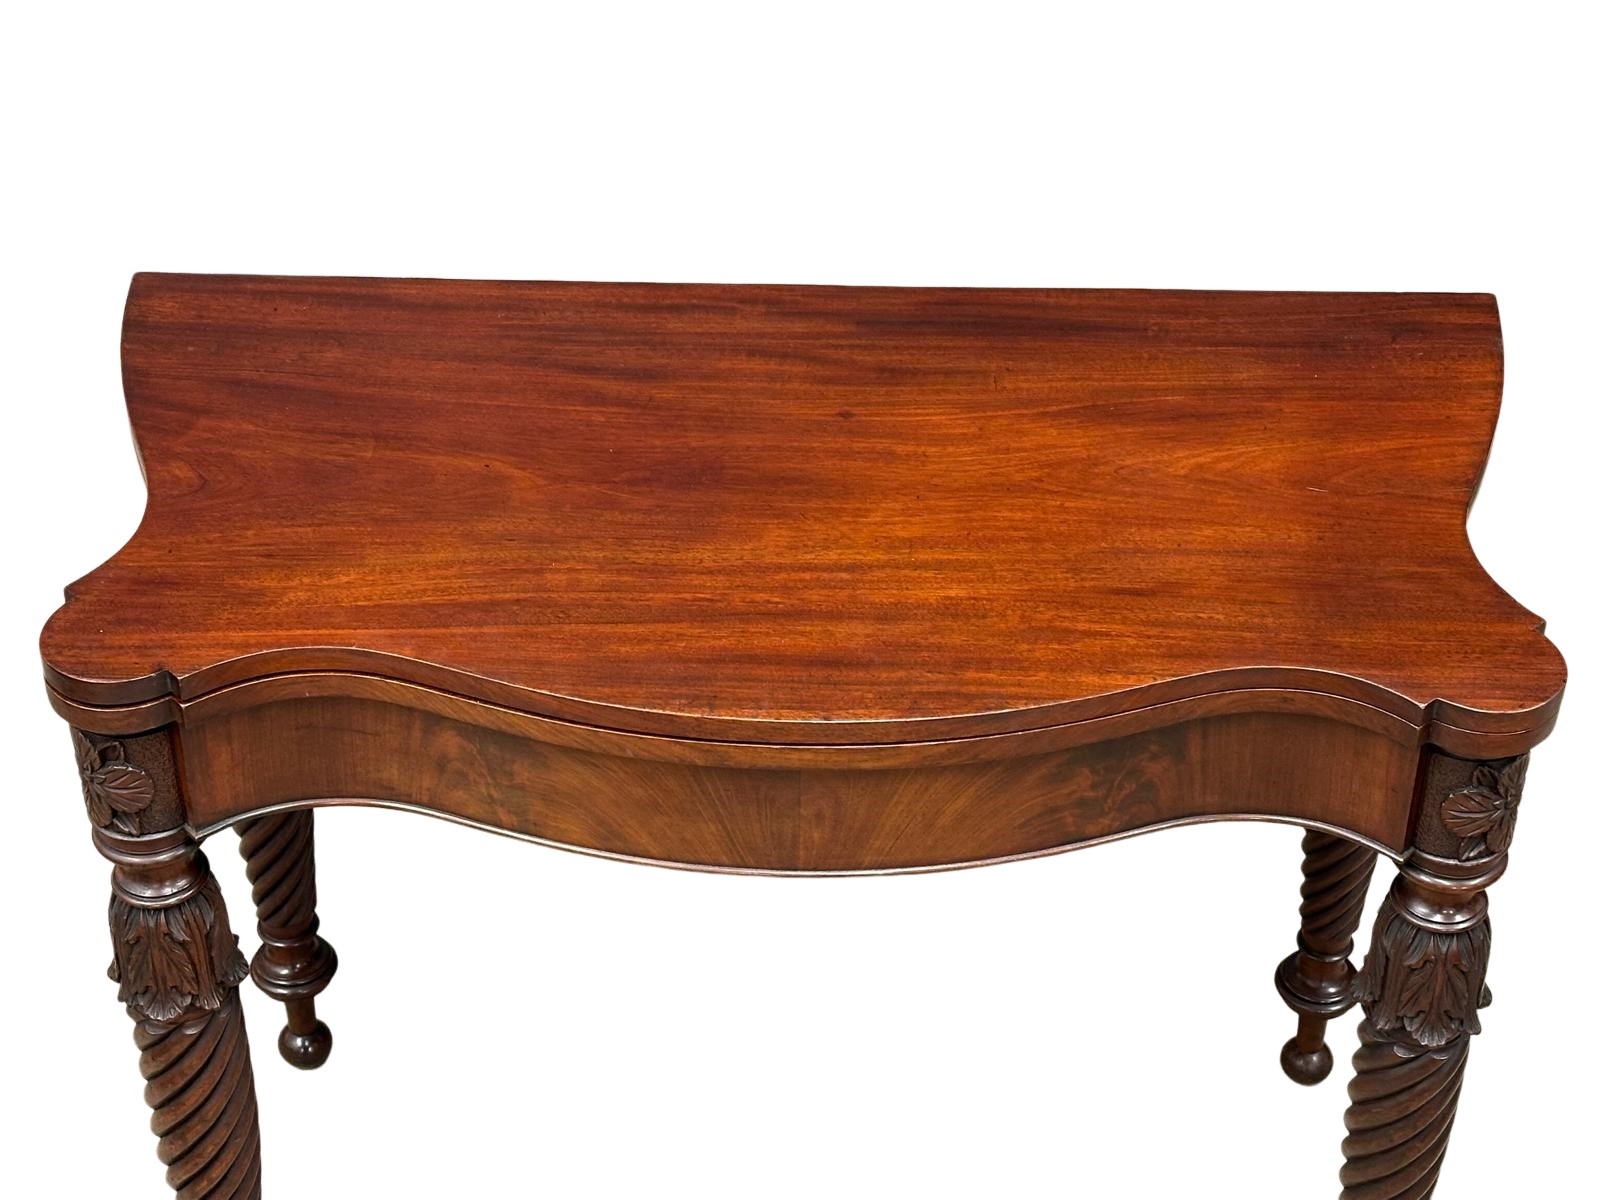 A William IV mahogany serpentine front turnover tea table on turned legs. Circa 1830. 87x44x75cm - Image 8 of 9